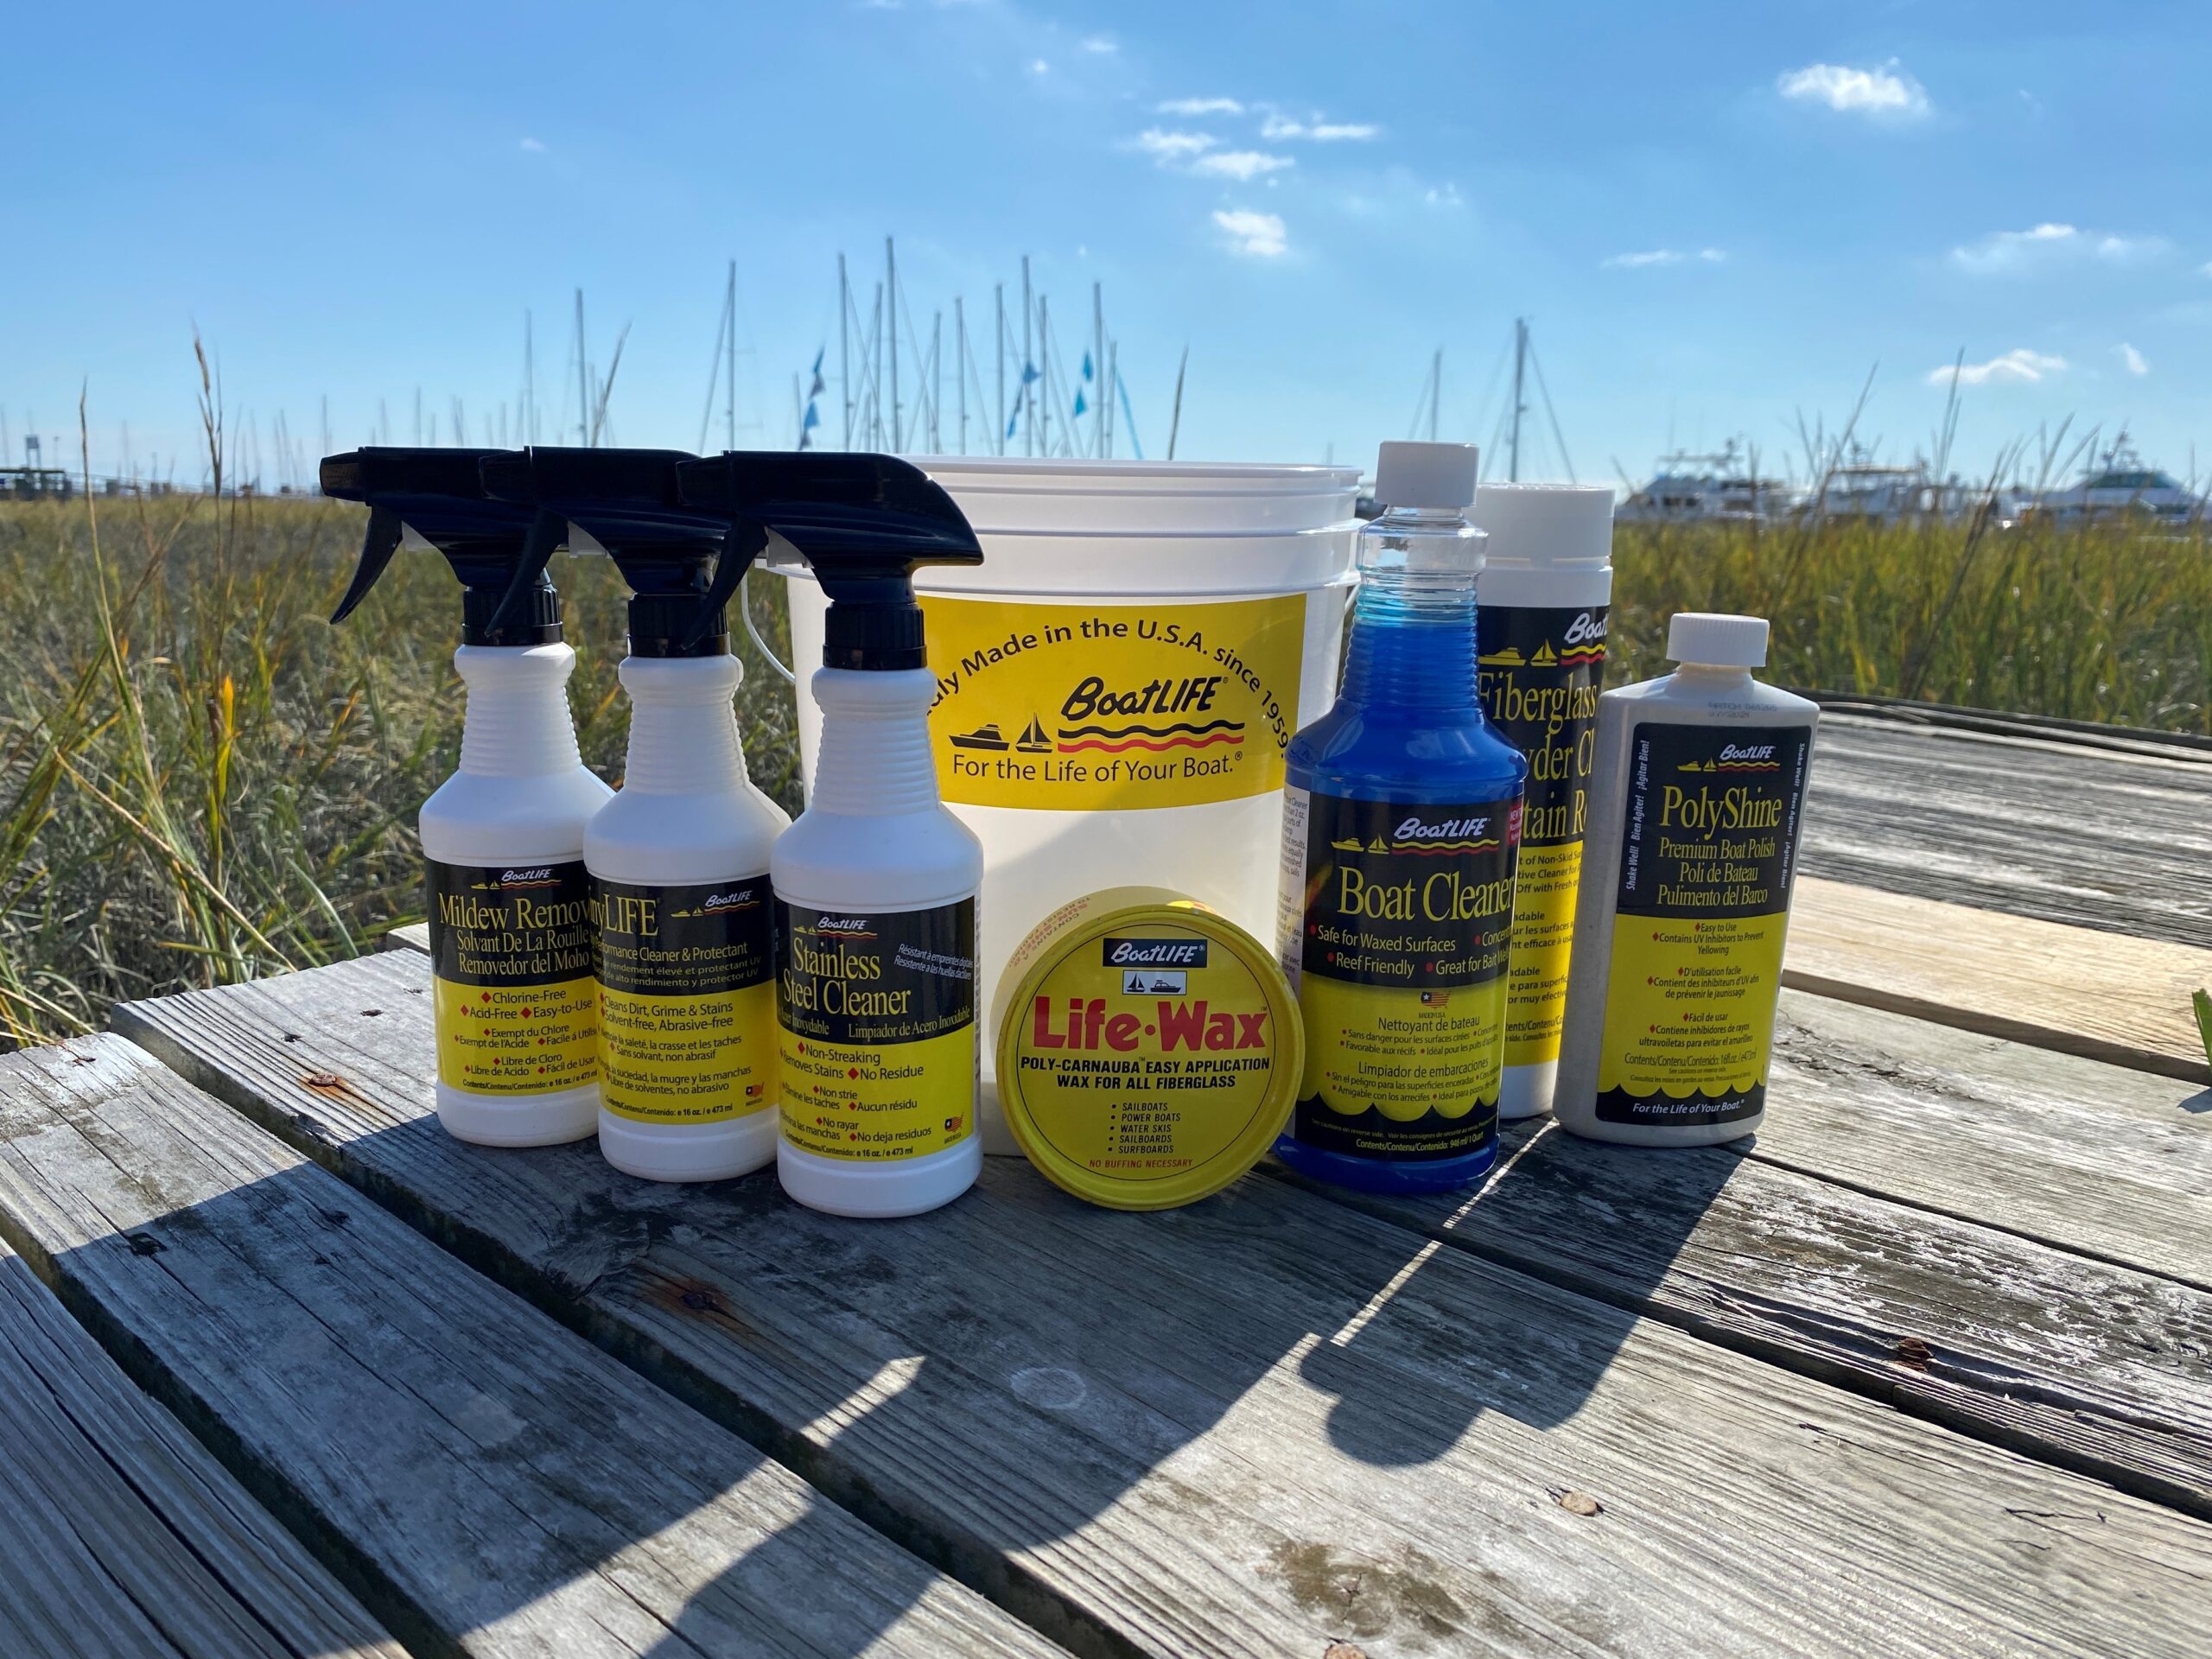 Boat Maintenance in a Bucket products